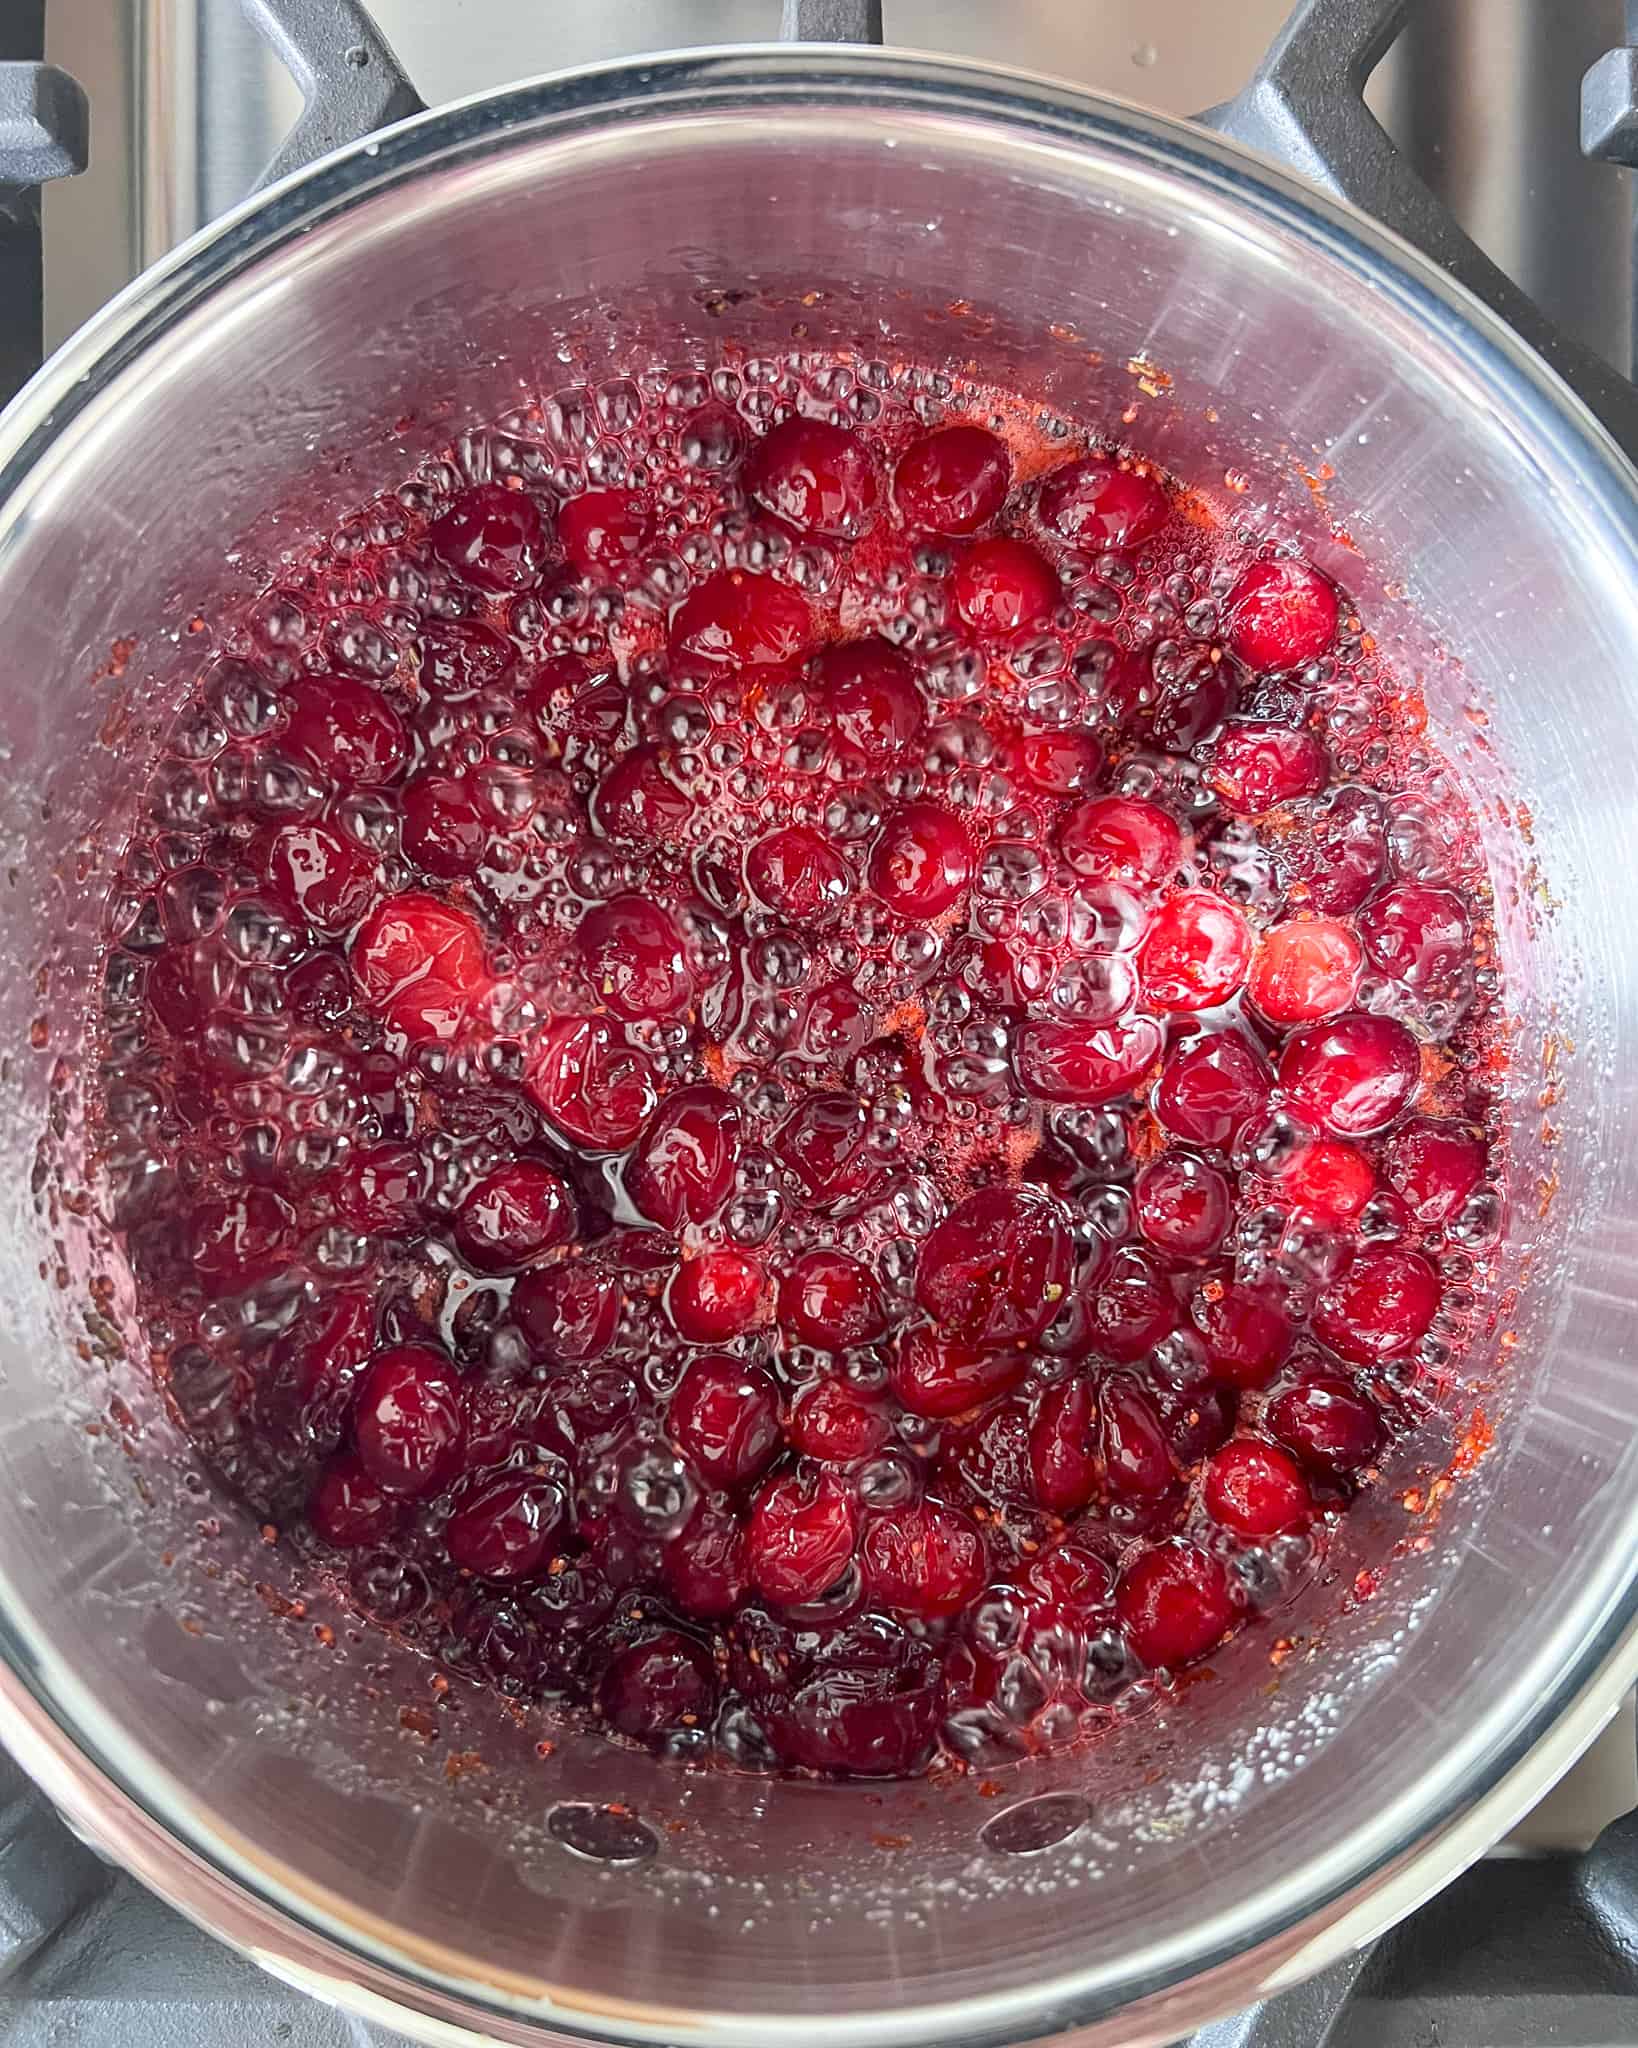 Reduce heat to medium and boil the cranberries gently for 7-8 minutes, stirring occasionally until cranberries have softened.